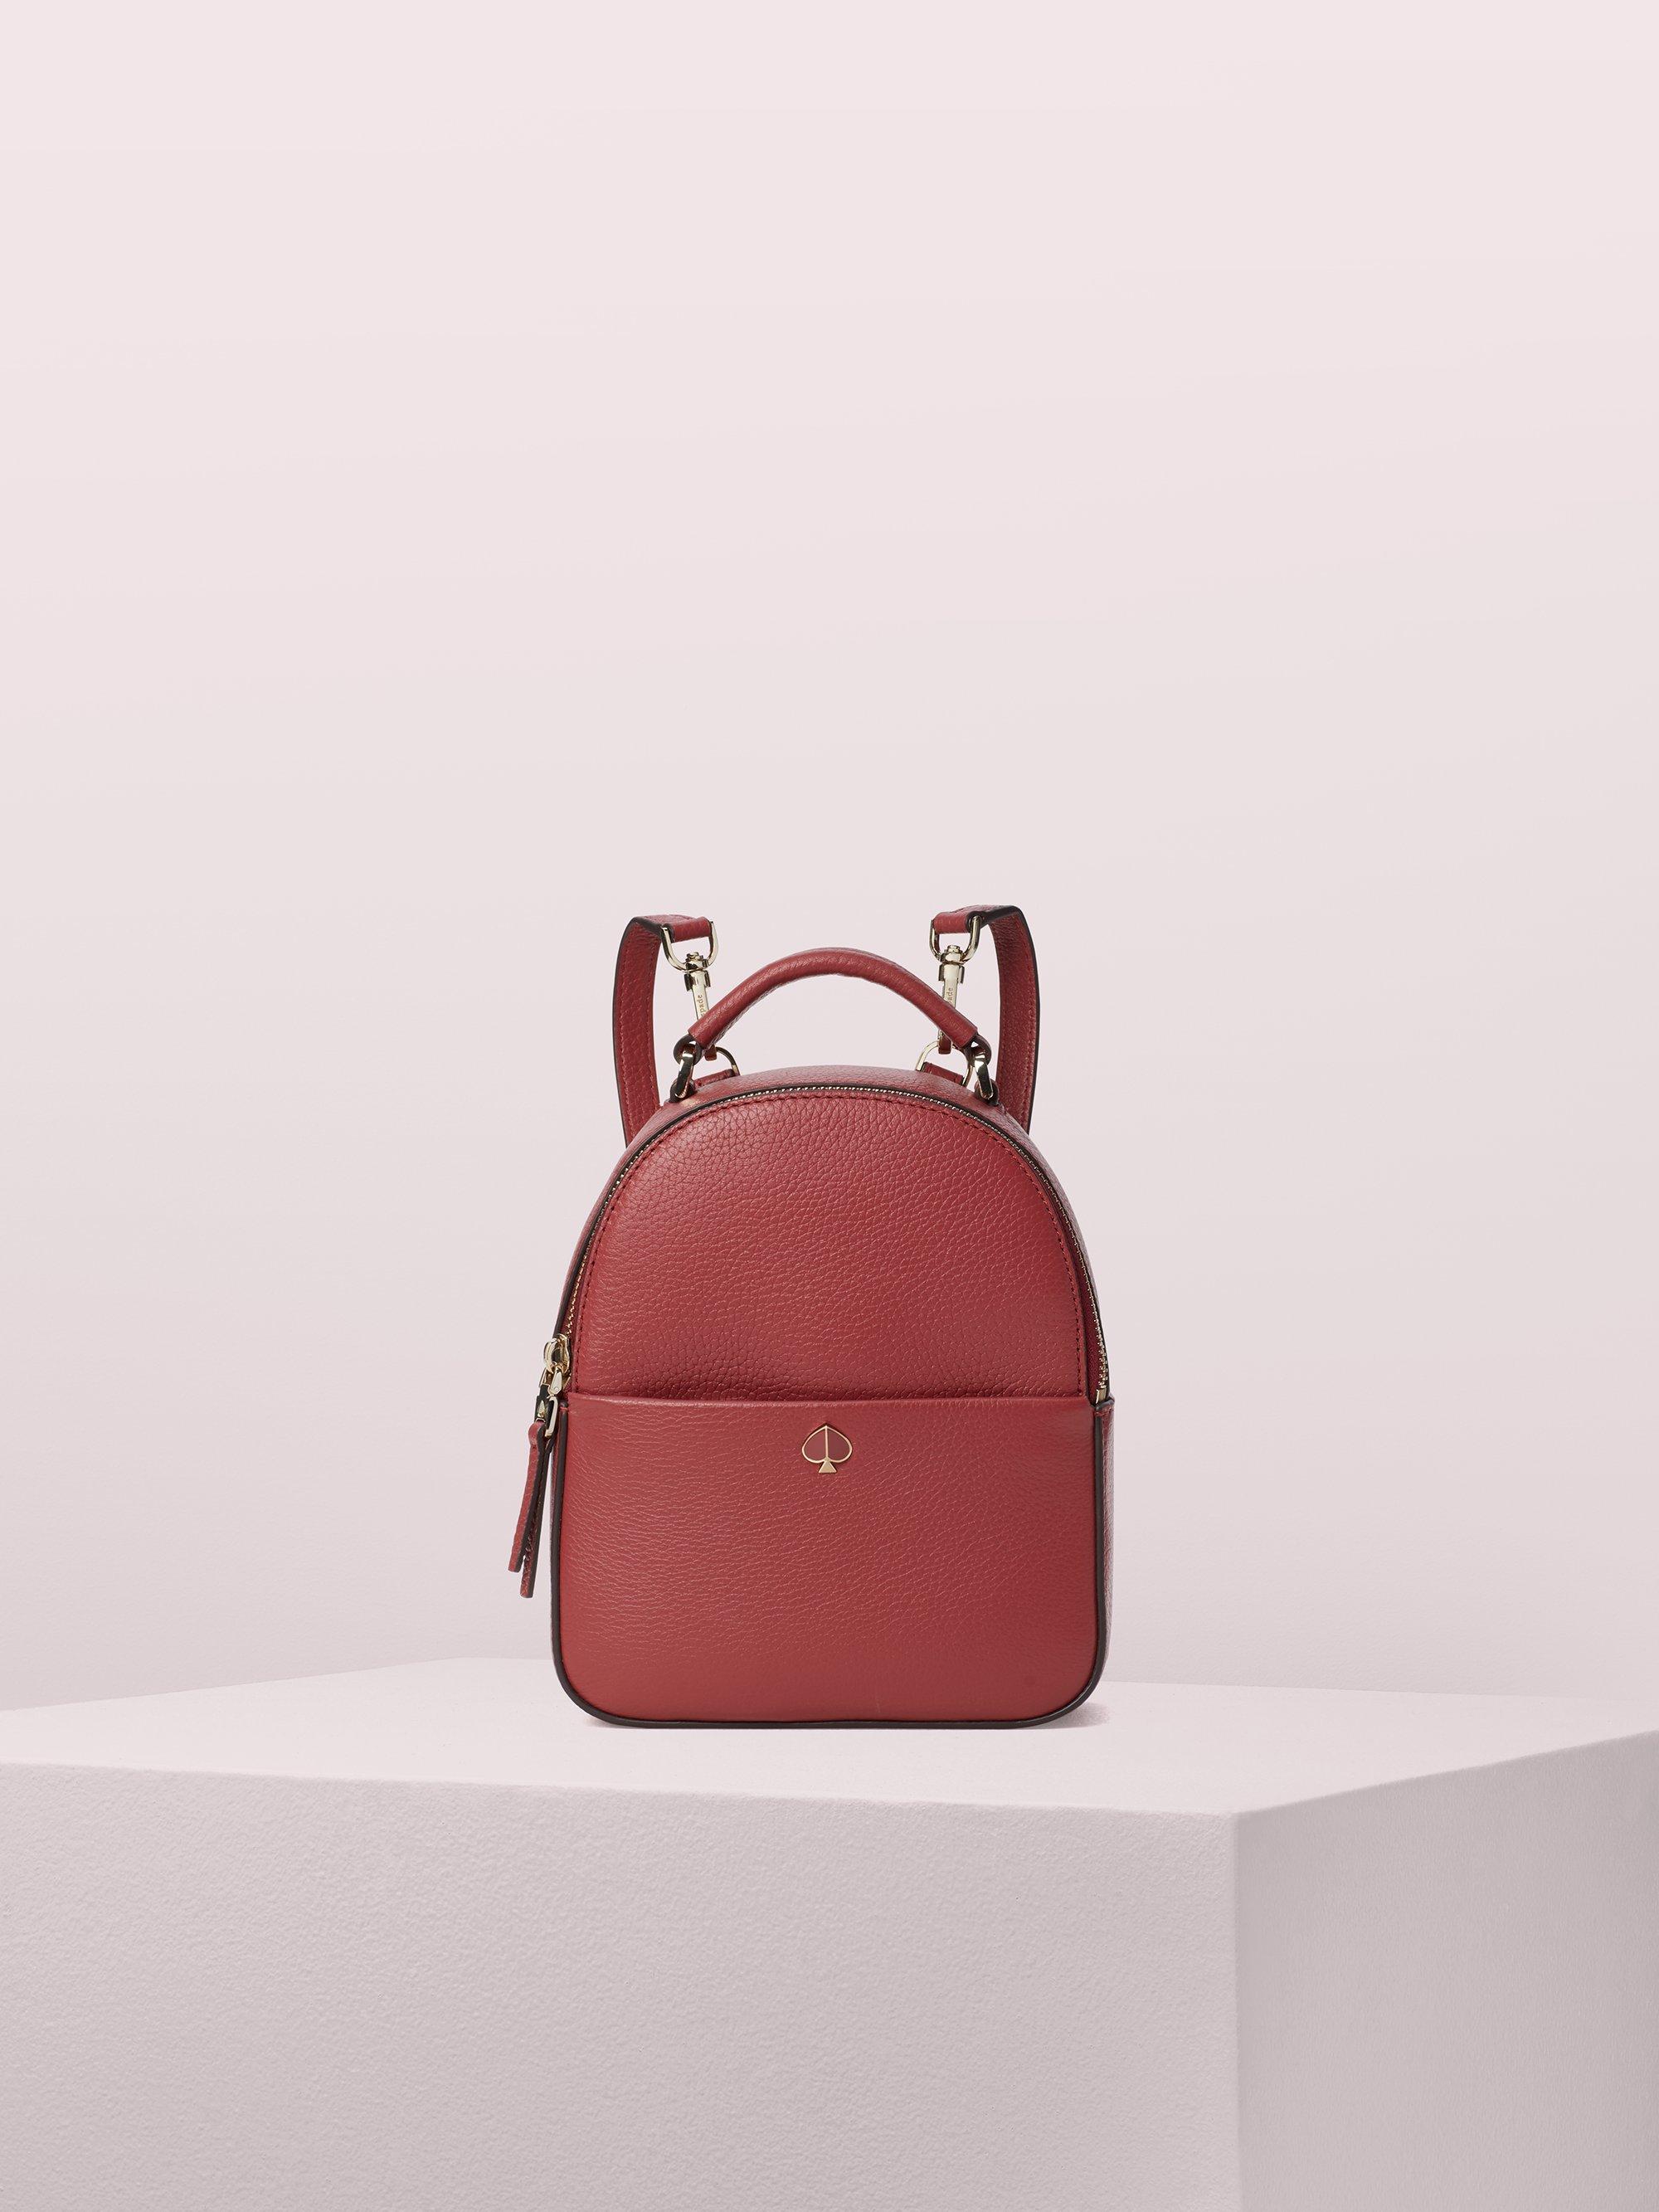 Kate Spade Leather Polly Mini Convertible Backpack in Red - Lyst